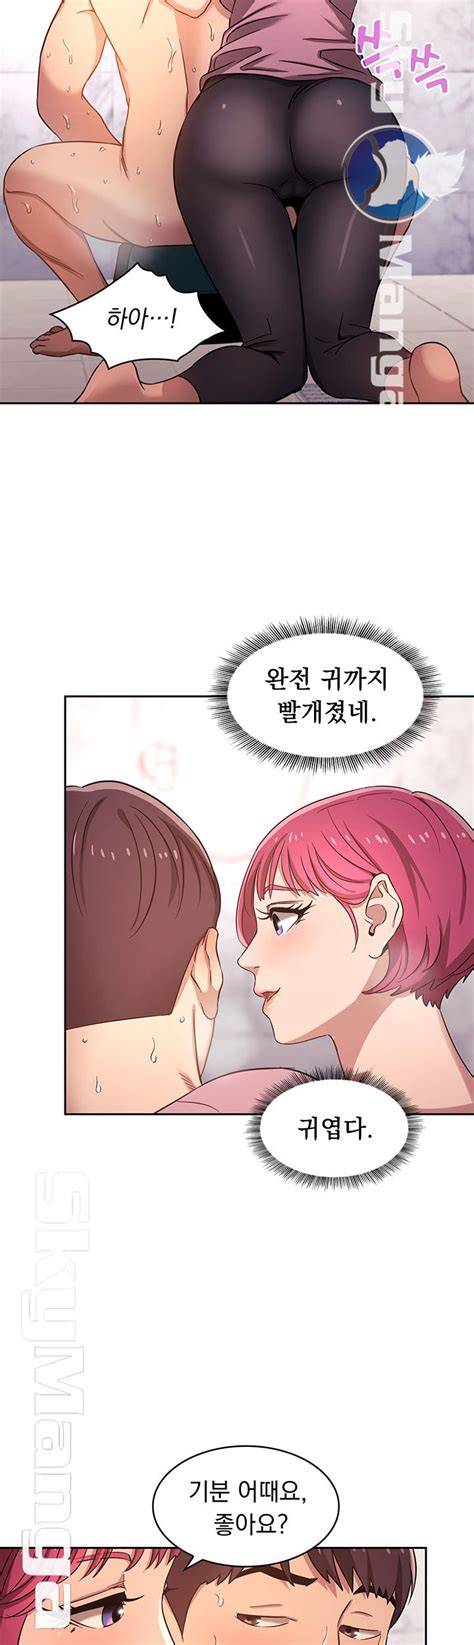 You want to eat it too? mother hunting raw - Capitulo 5 - manhwa-raw